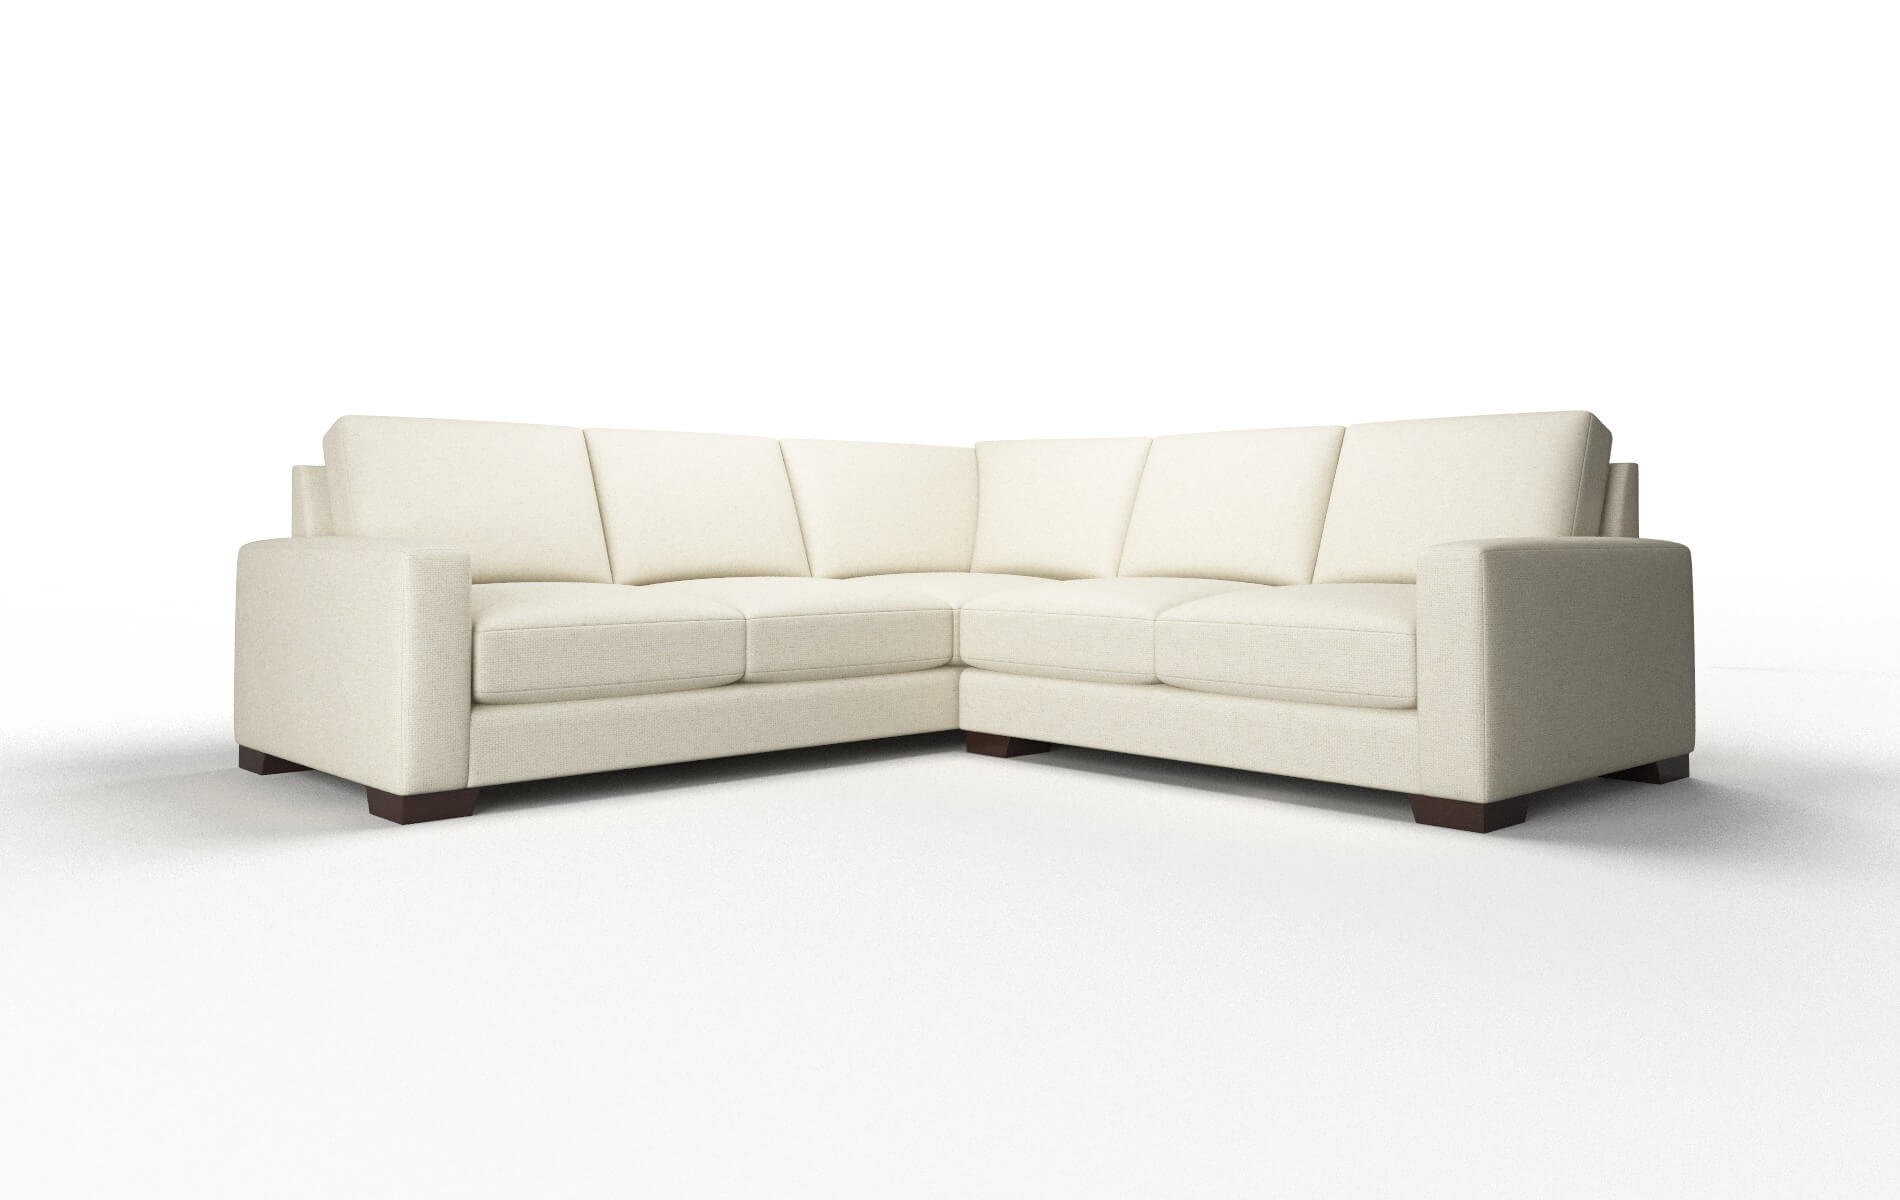 London Redondo Oyster Sectional espresso legs 1